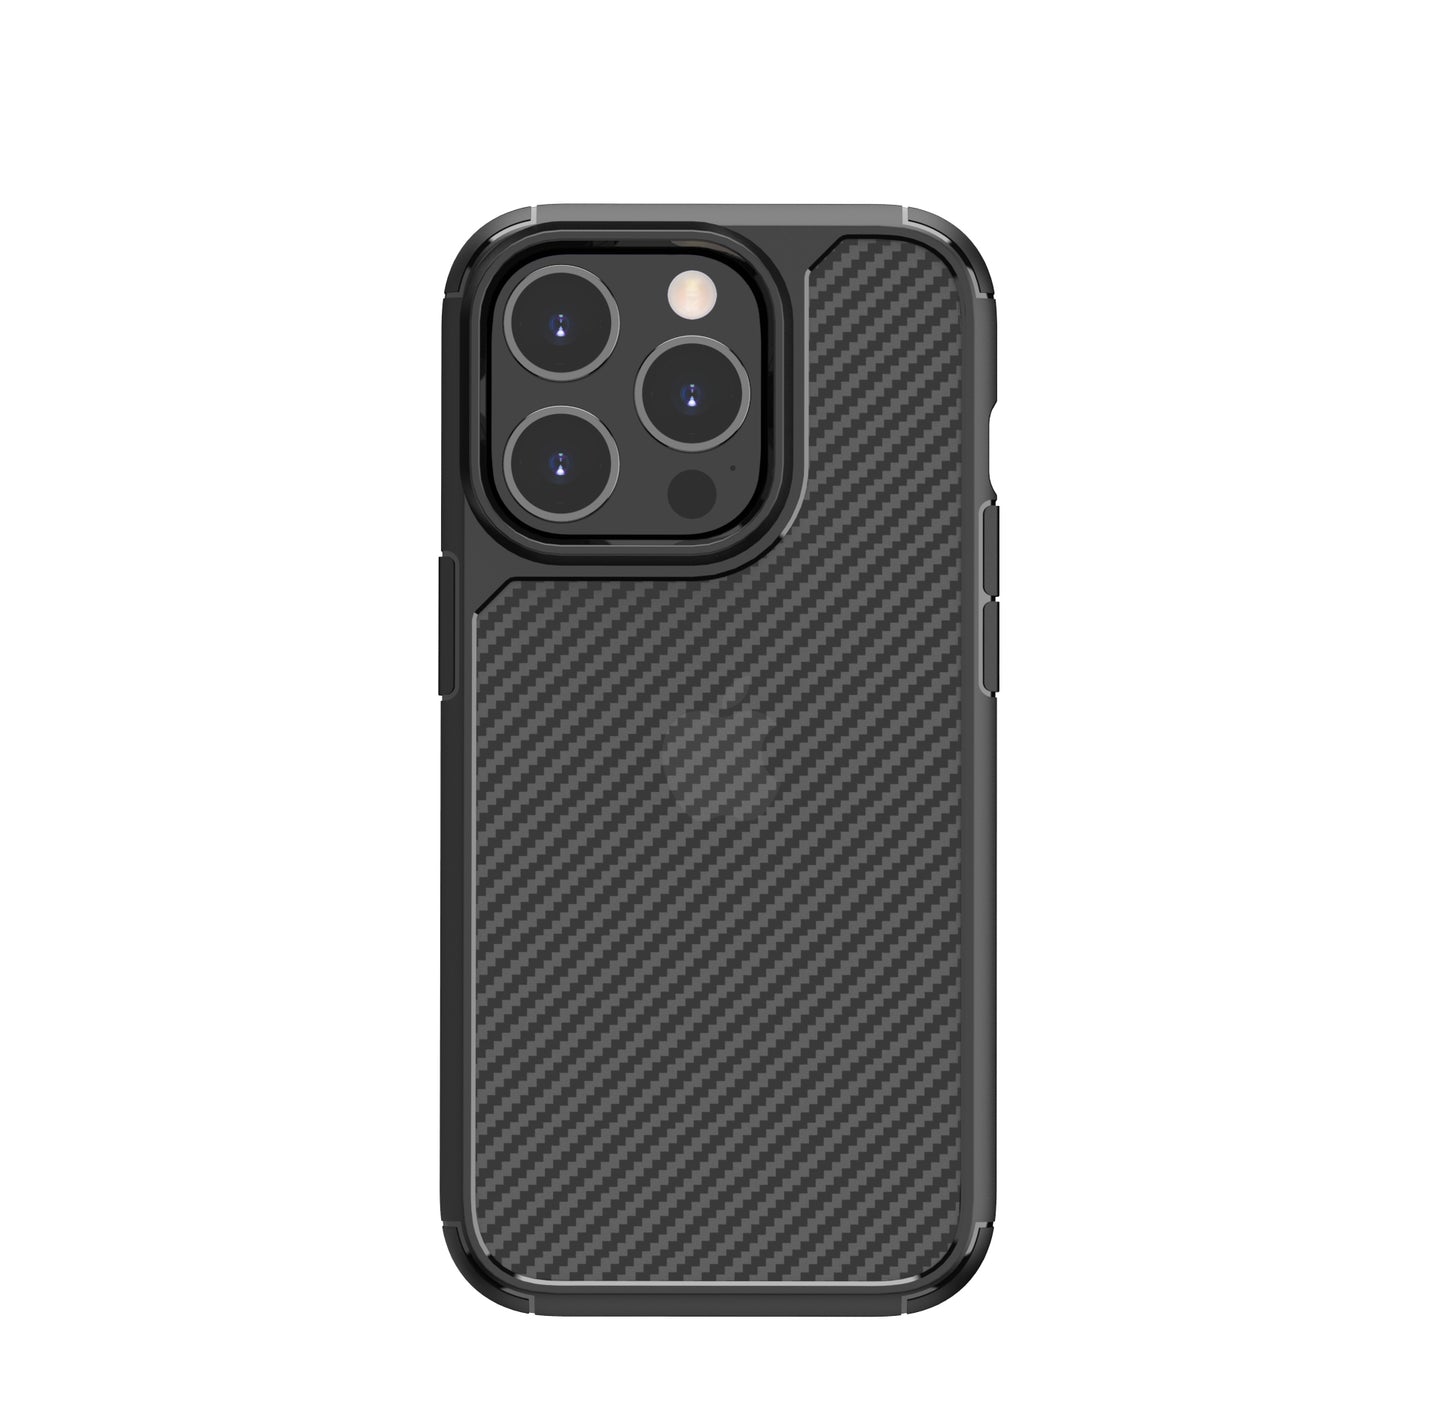 semi-transparent frosted carbon fiber texture hard protection shatter-resistant phone case for iphone 11 pro max